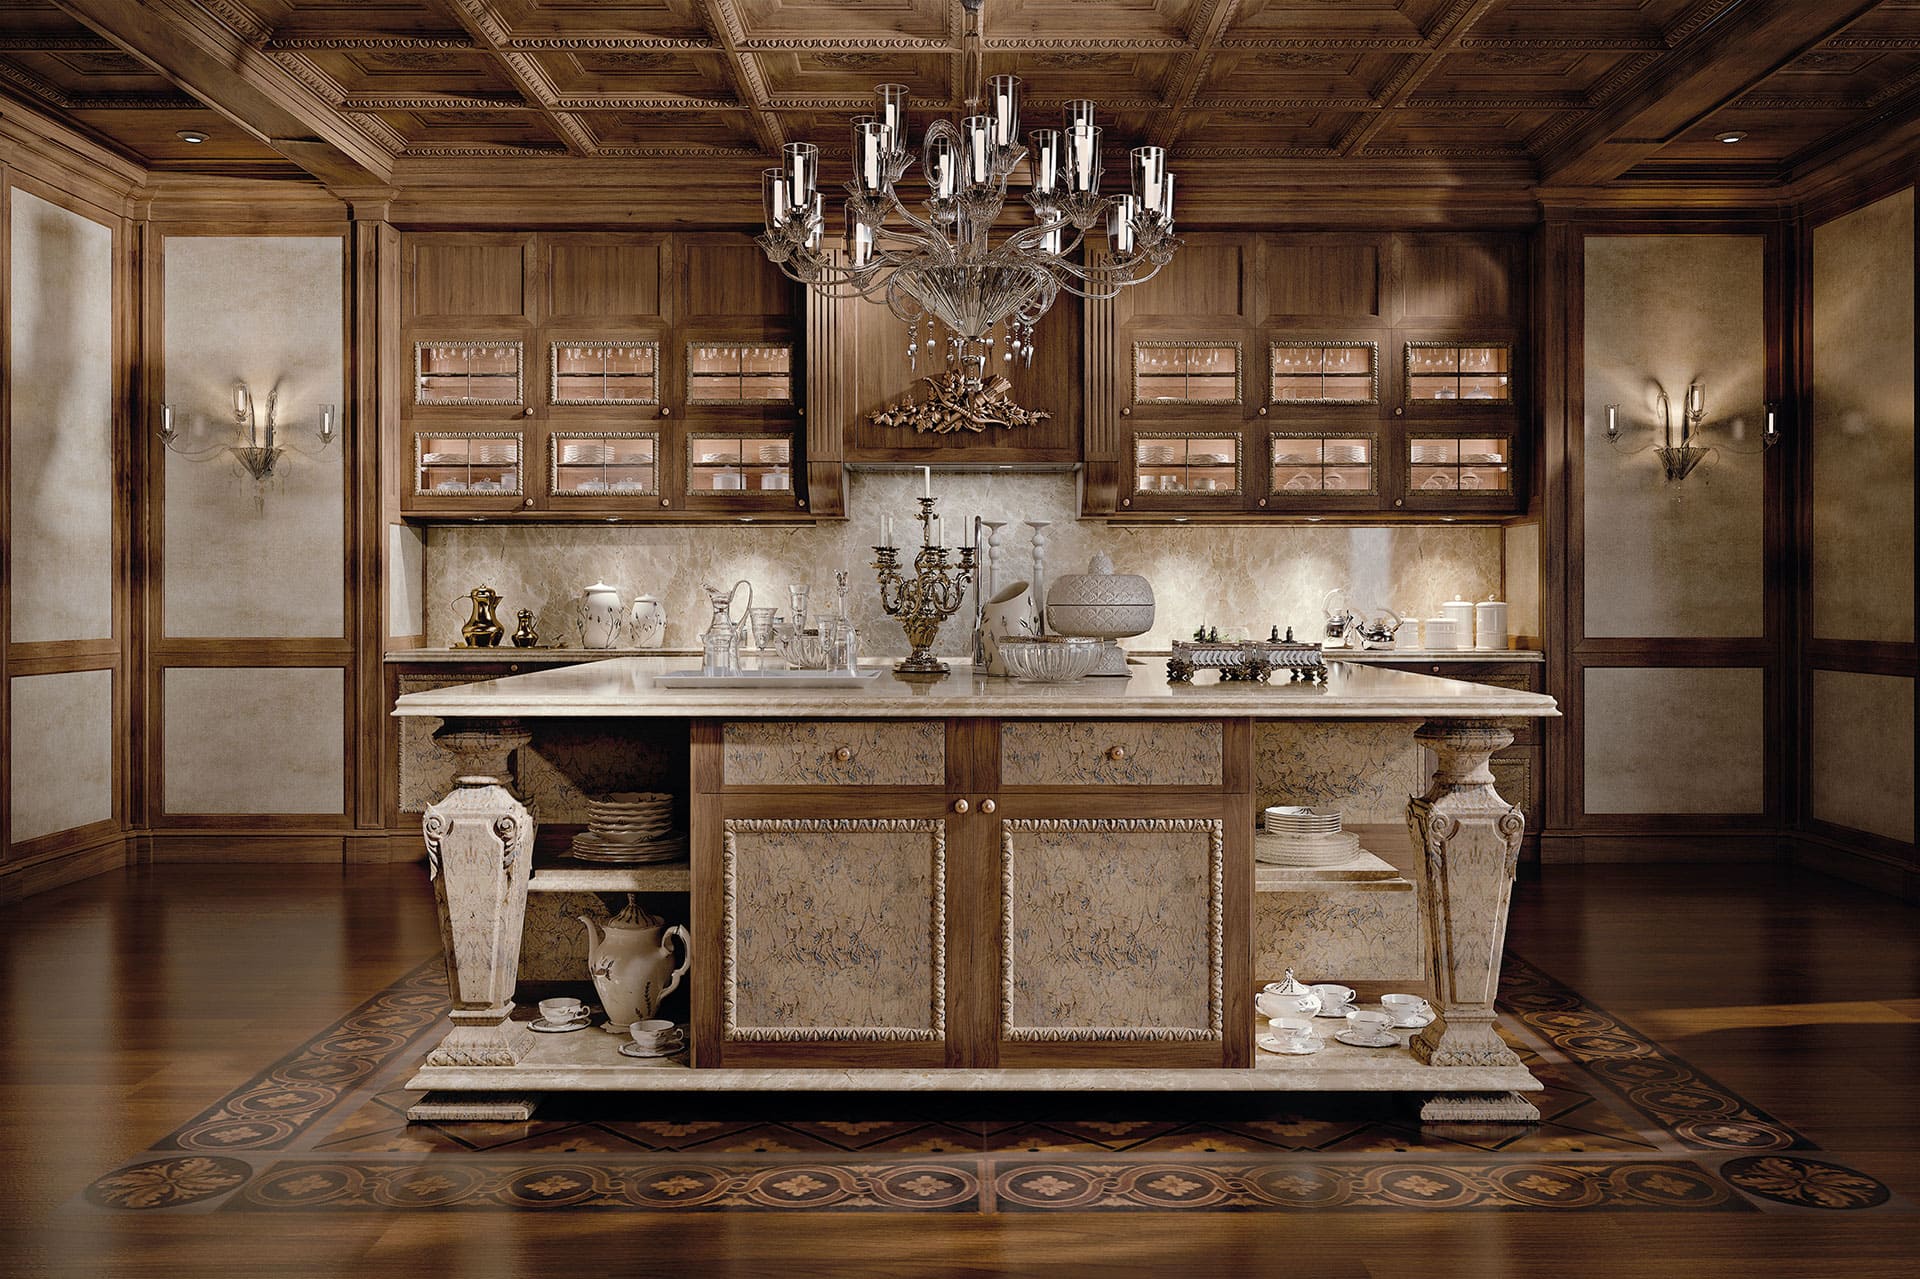 Creatice Old Italian Kitchens for Large Space